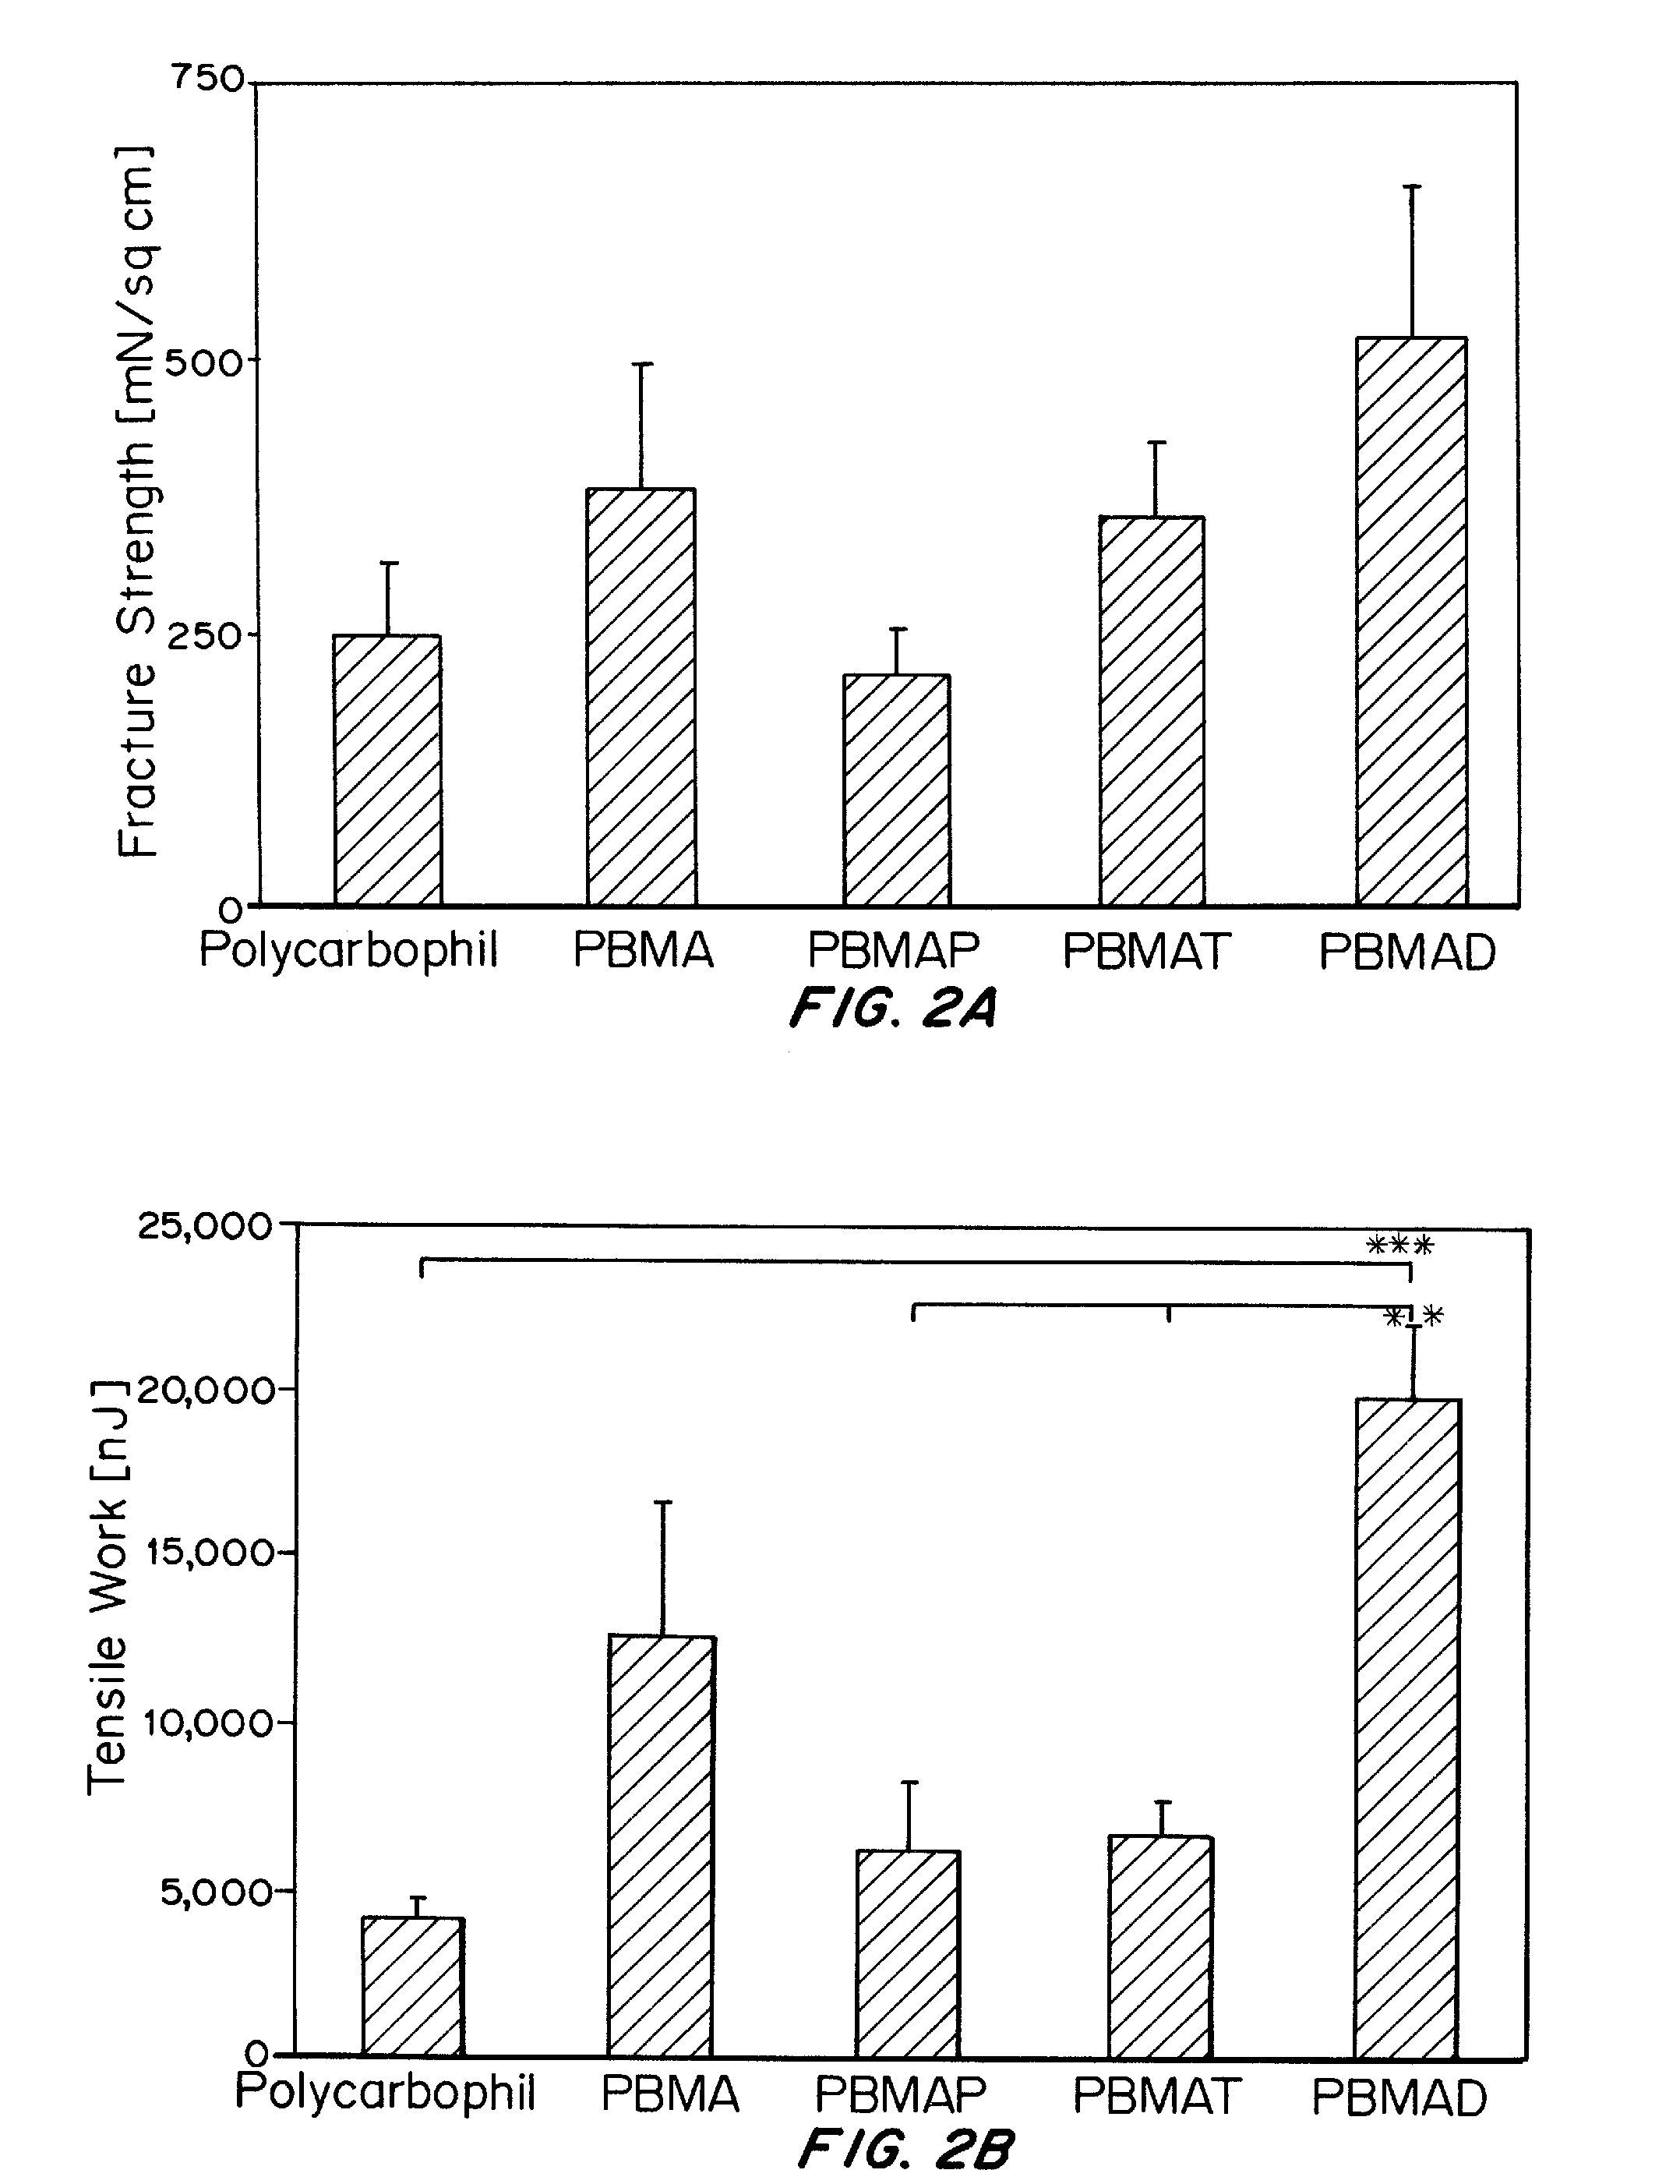 Nanoparticle compositions and methods for improved oral delivery of active agents